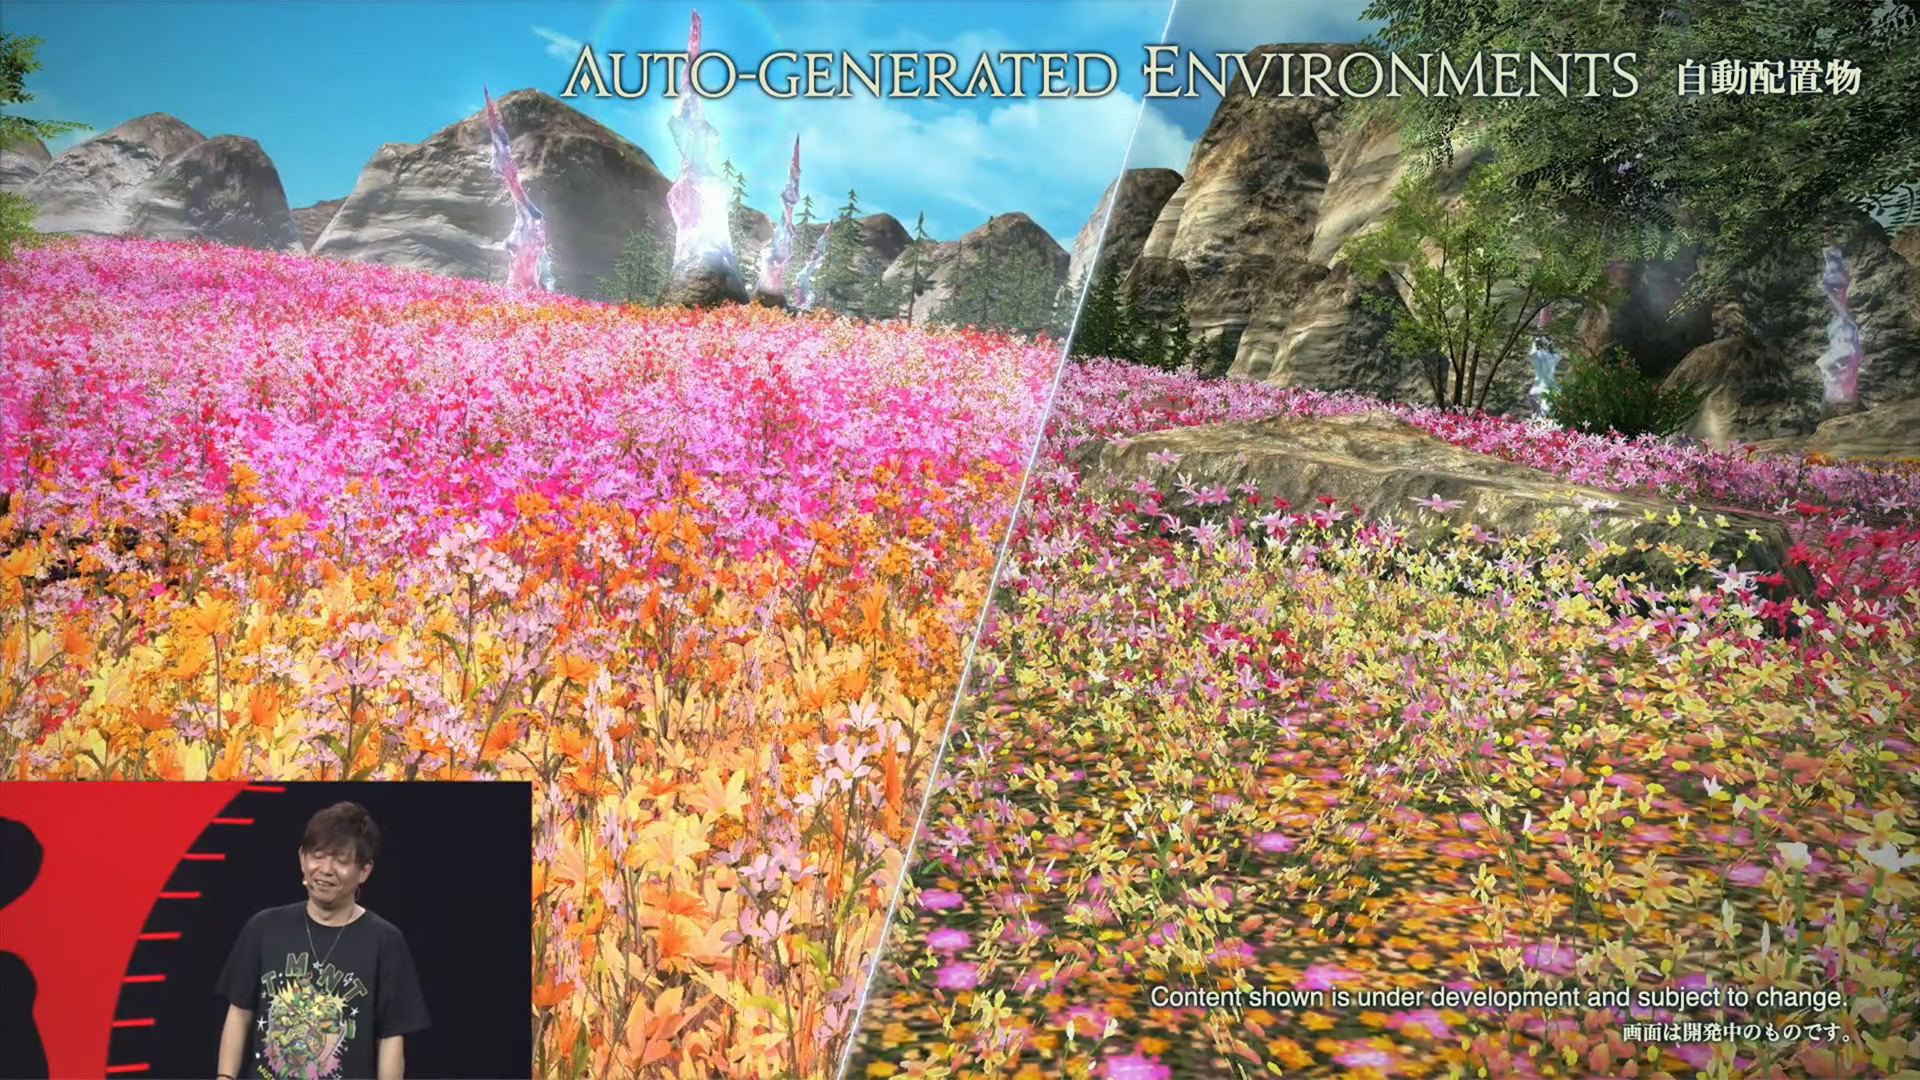 Final Fantasy XIV: Dawntrail's auto-generated environments